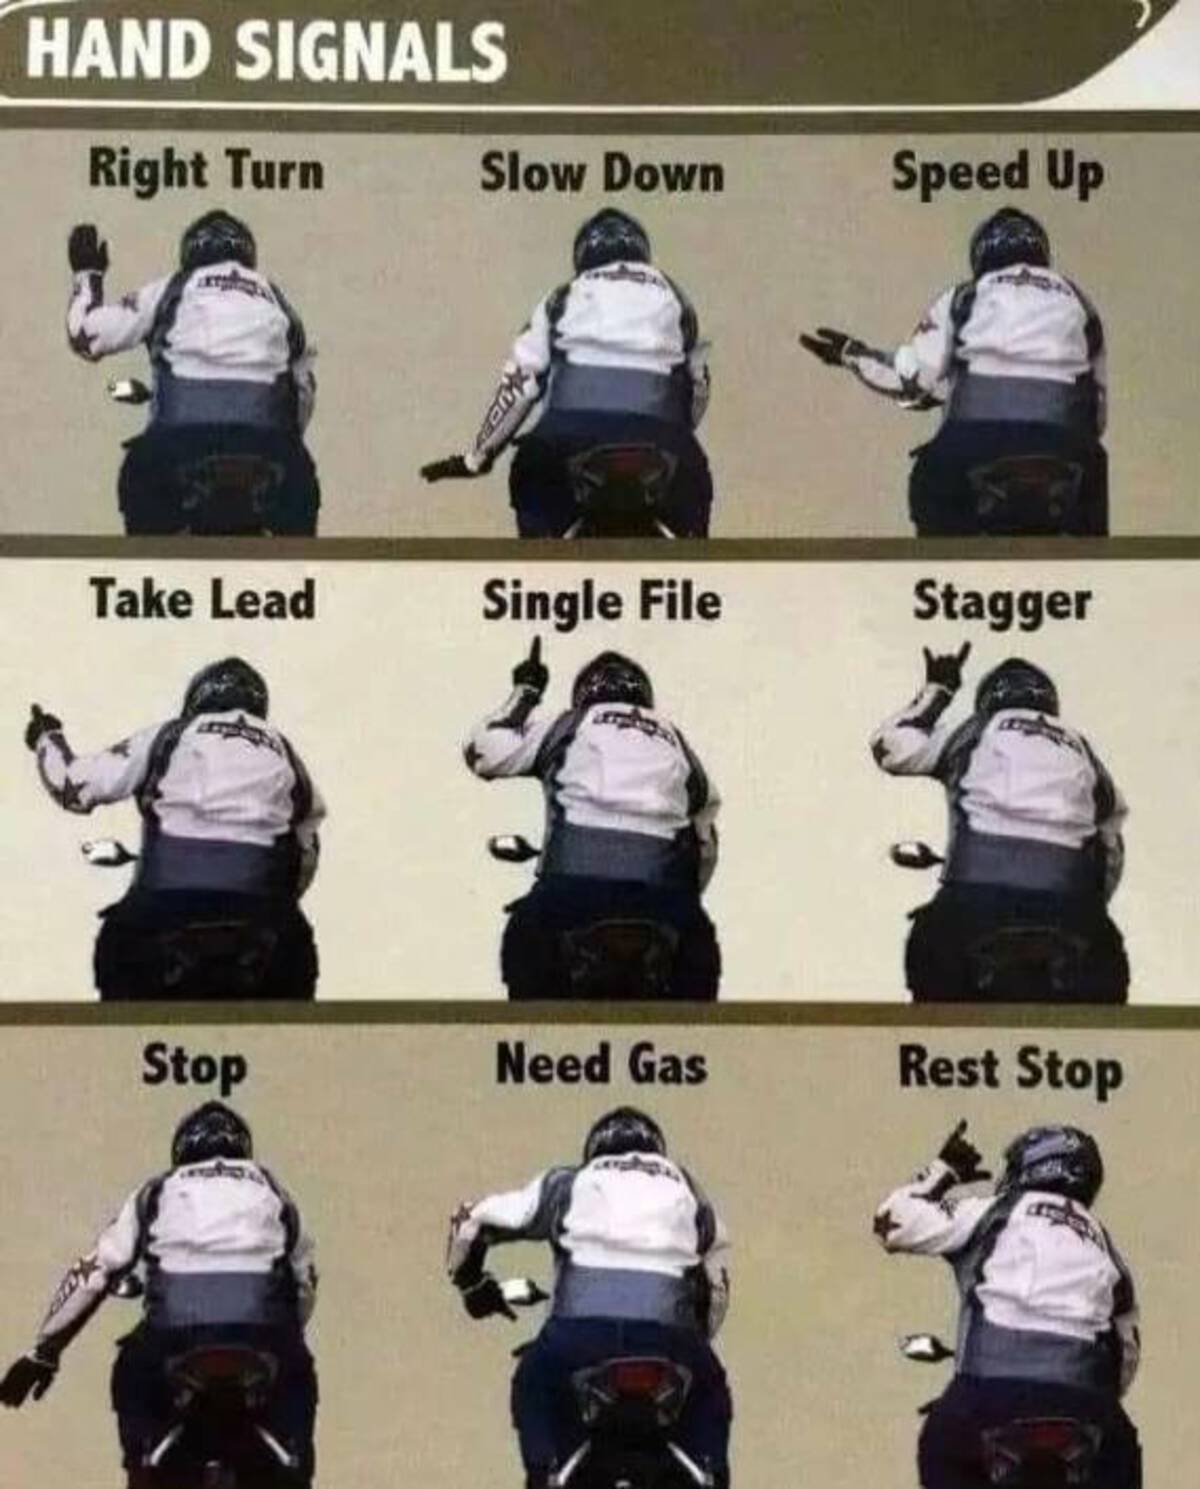 biker hand signals - Hand Signals Right Turn Slow Down Speed Up Take Lead Single File Stagger Stop Need Gas Rest Stop